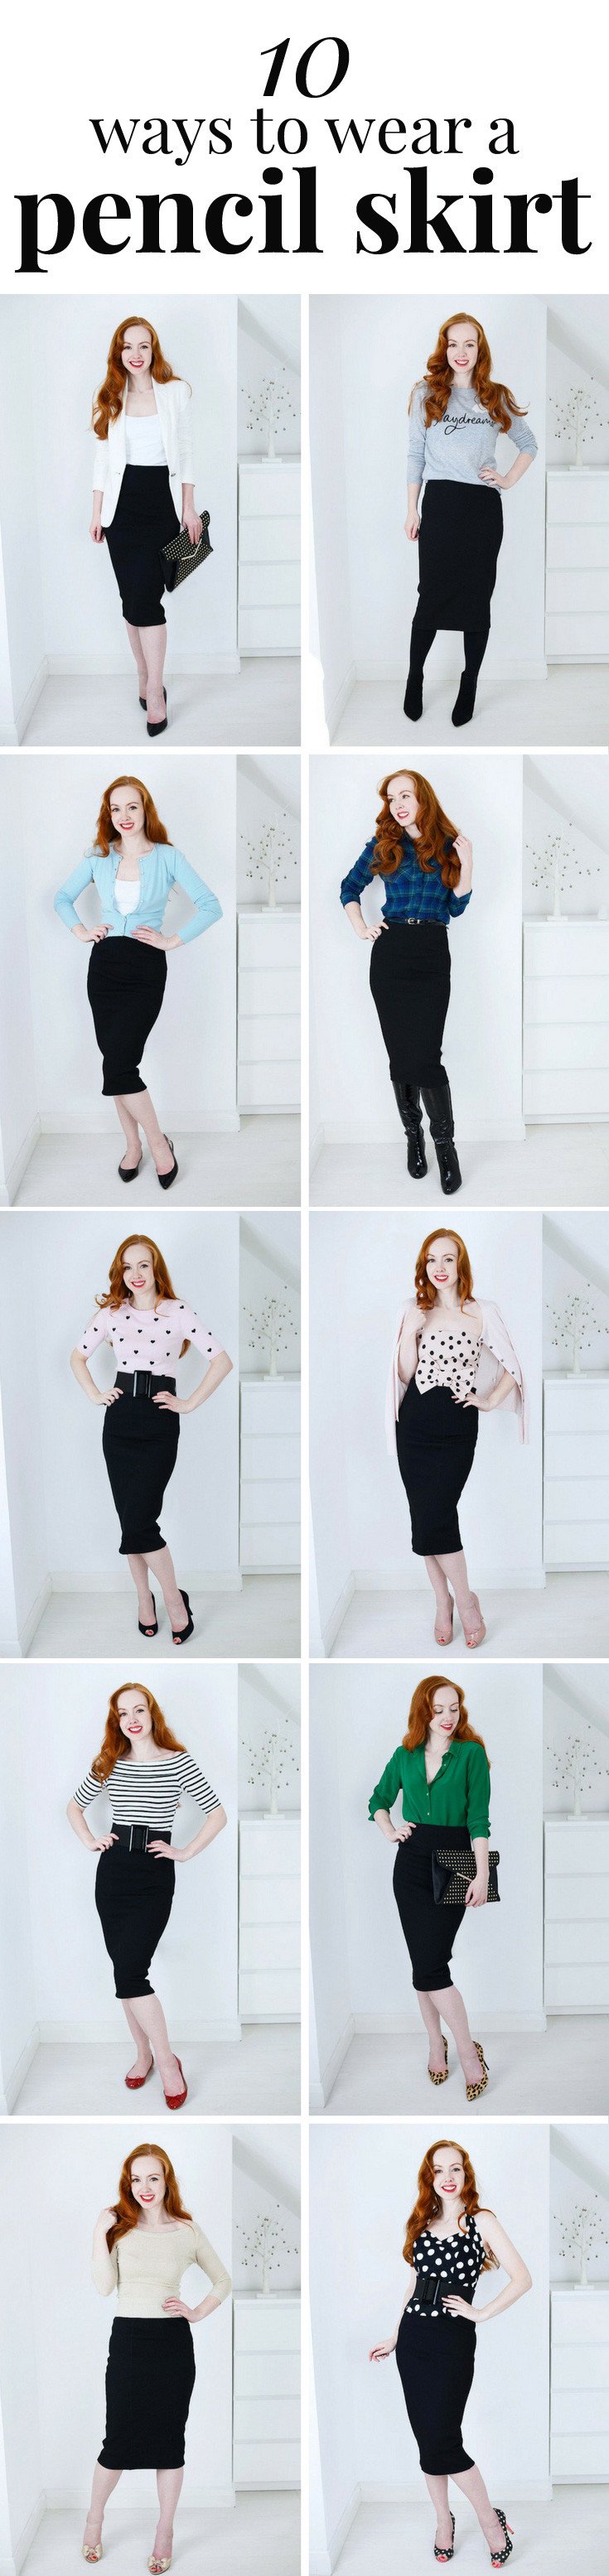 formal pencil skirt outfits